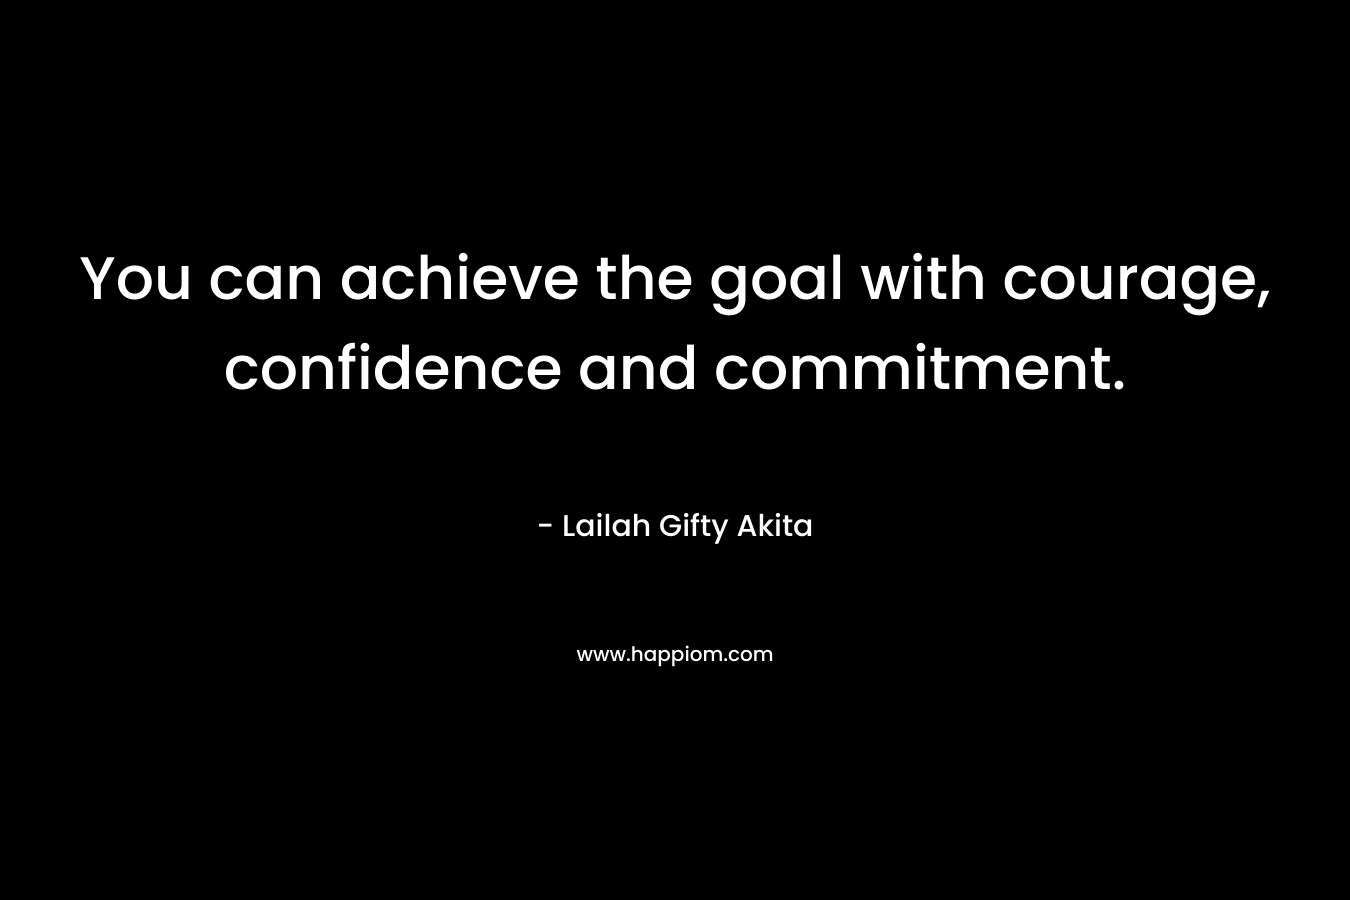 You can achieve the goal with courage, confidence and commitment.